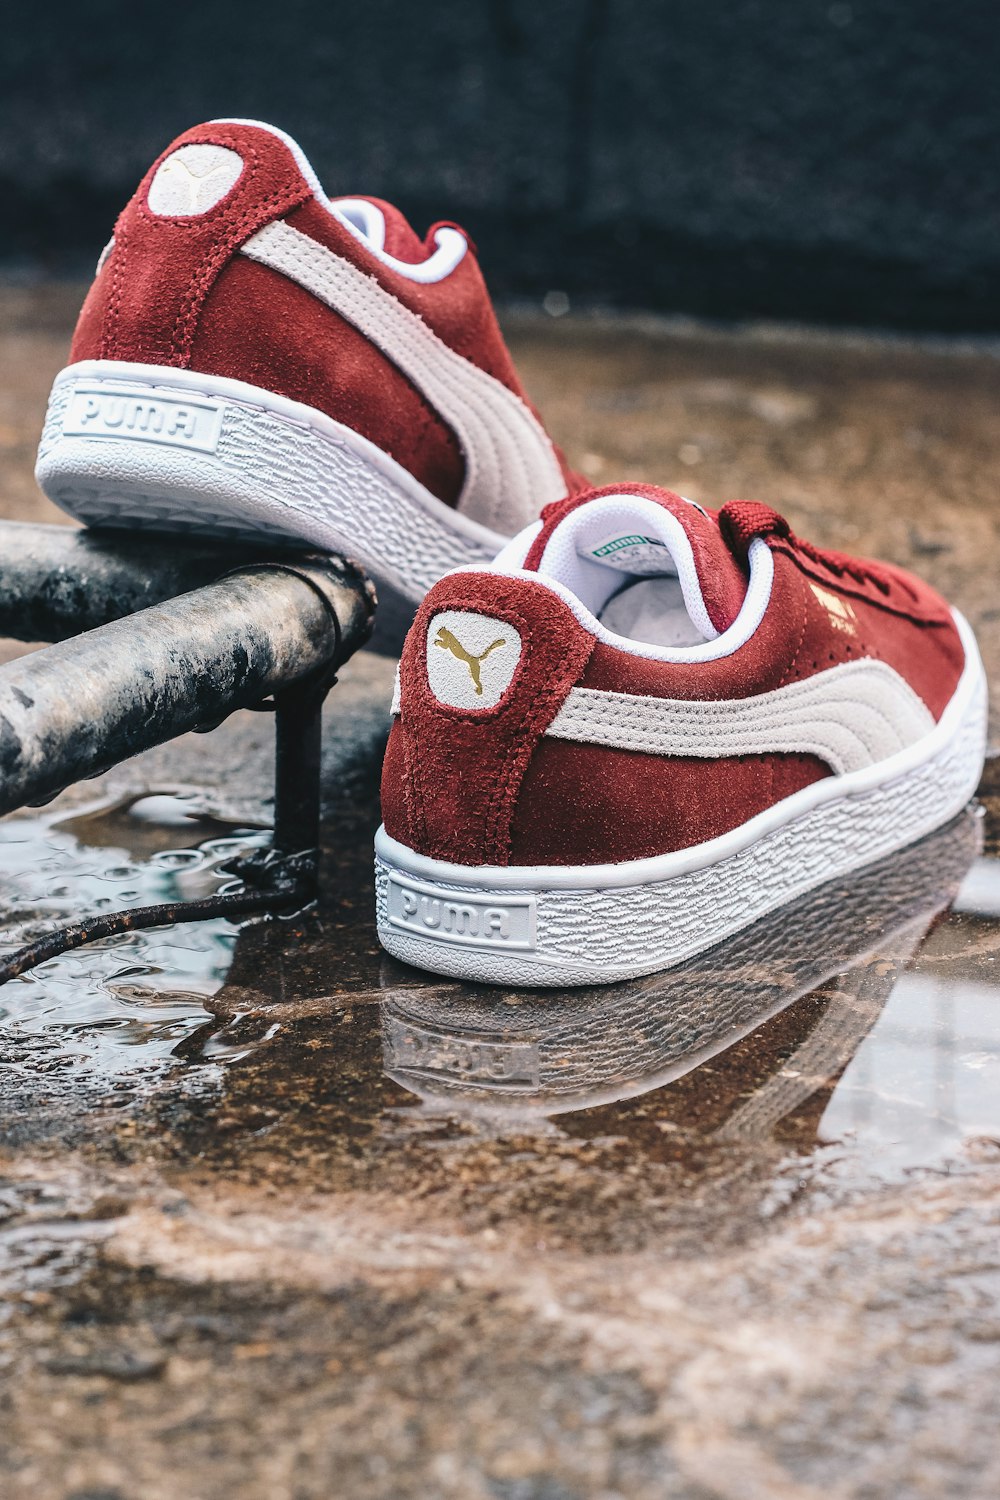 Red and white nike athletic shoes on black metal bar photo – Sneakers× sneaker× puma× Image Unsplash